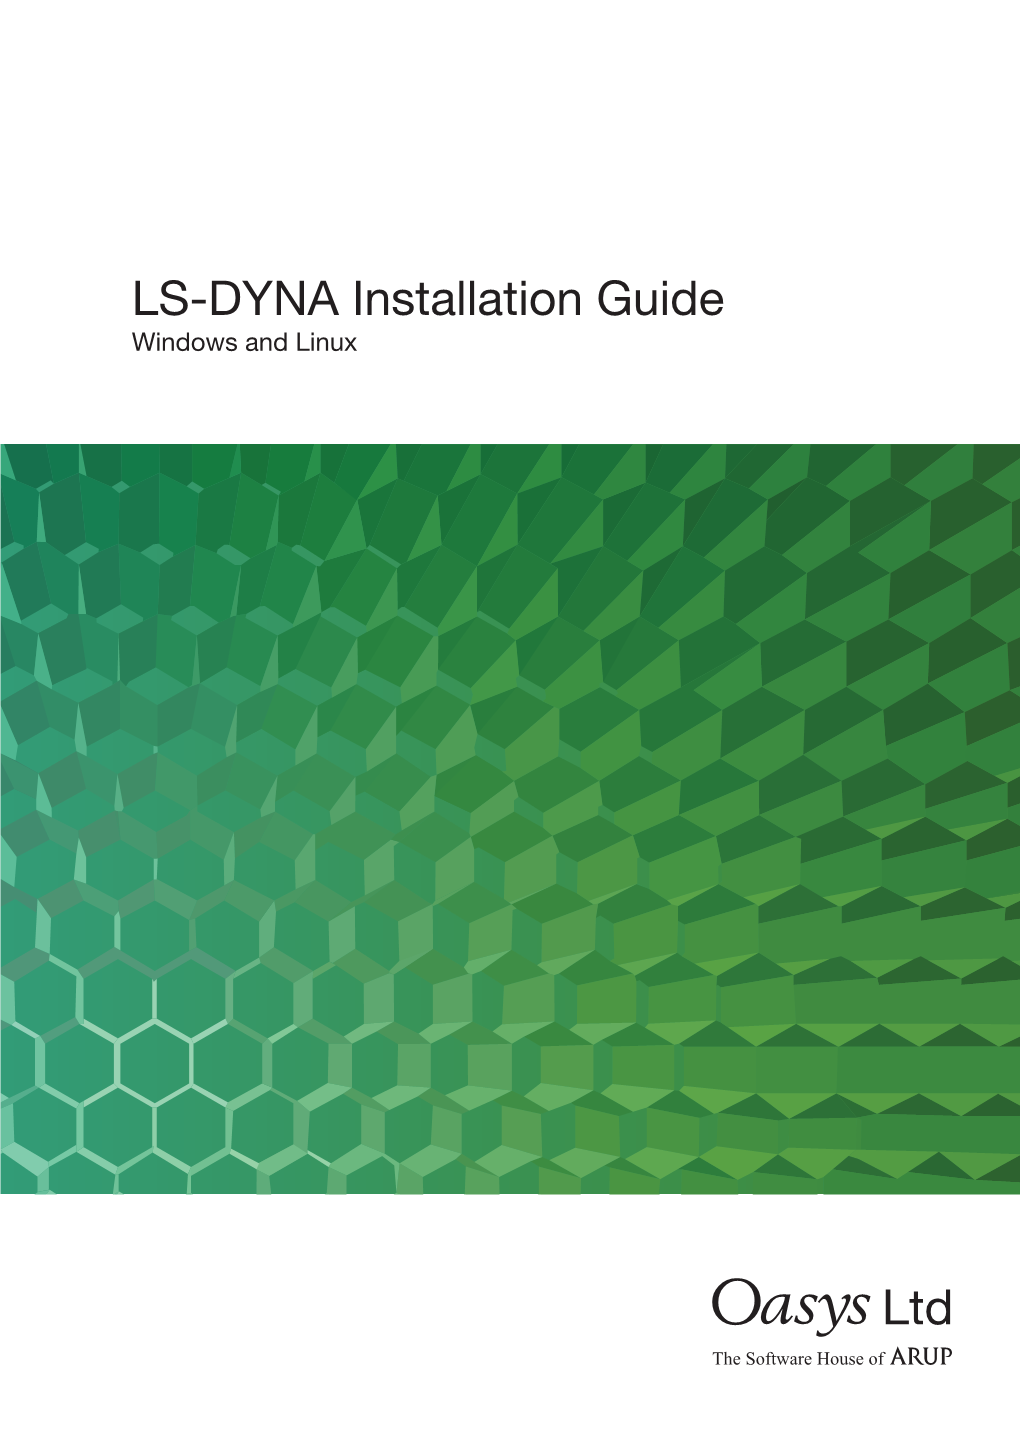 LS-DYNA Installation Guide Windows and Linux OASYS Ltd LS-DYNA ENVIRONMENT LS-DYNA INSTALLATION GUIDE